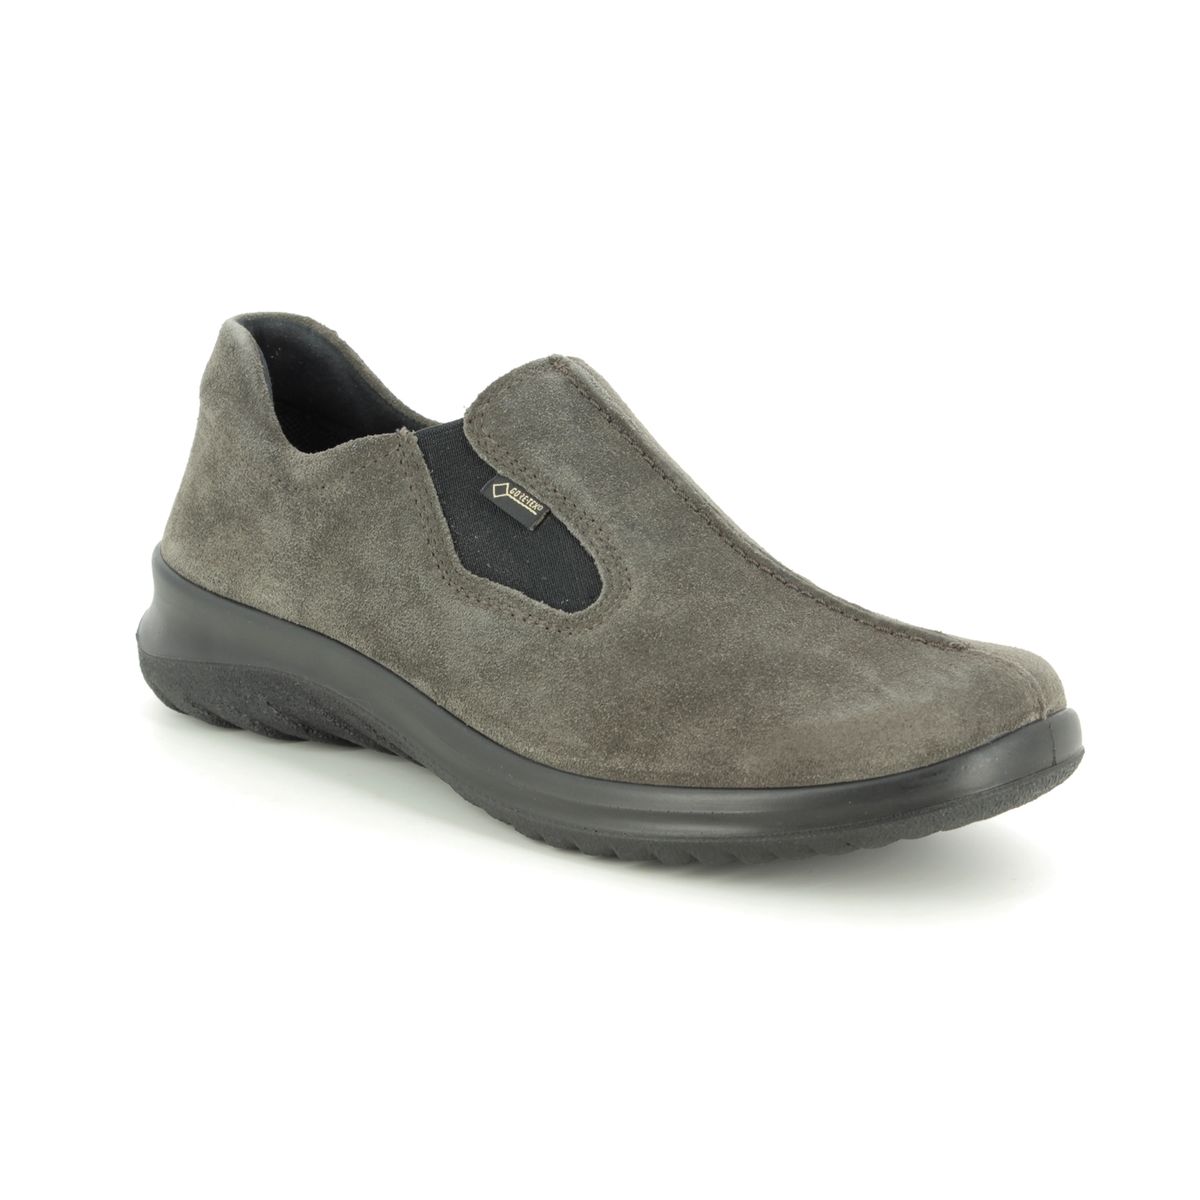 Legero Soft Shoe Gtx Grey Suede Womens Comfort Slip On Shoes 09568-28 In Size 8 In Plain Grey Suede